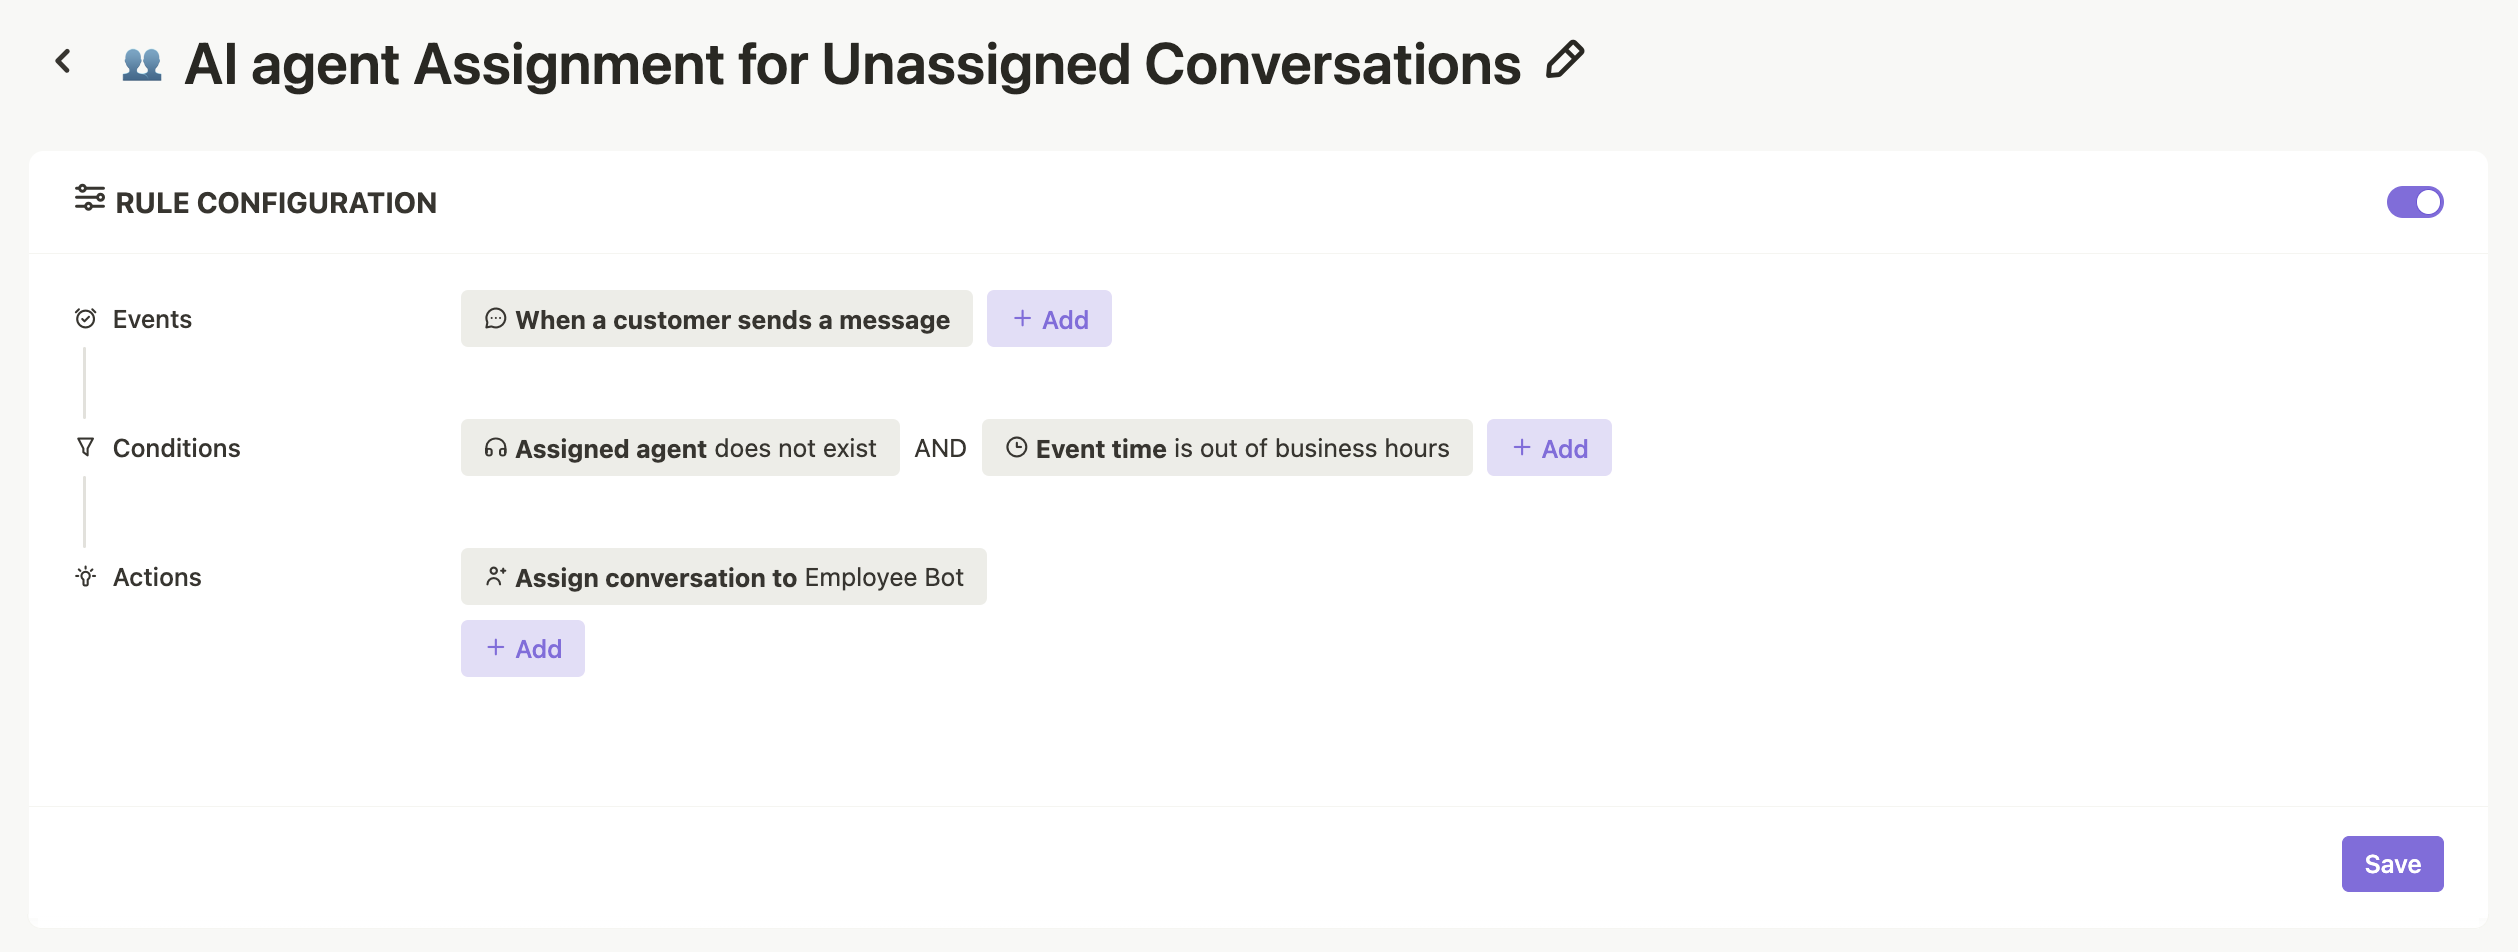 The image illustrates the process of assigning AI agents to unassigned conversations!